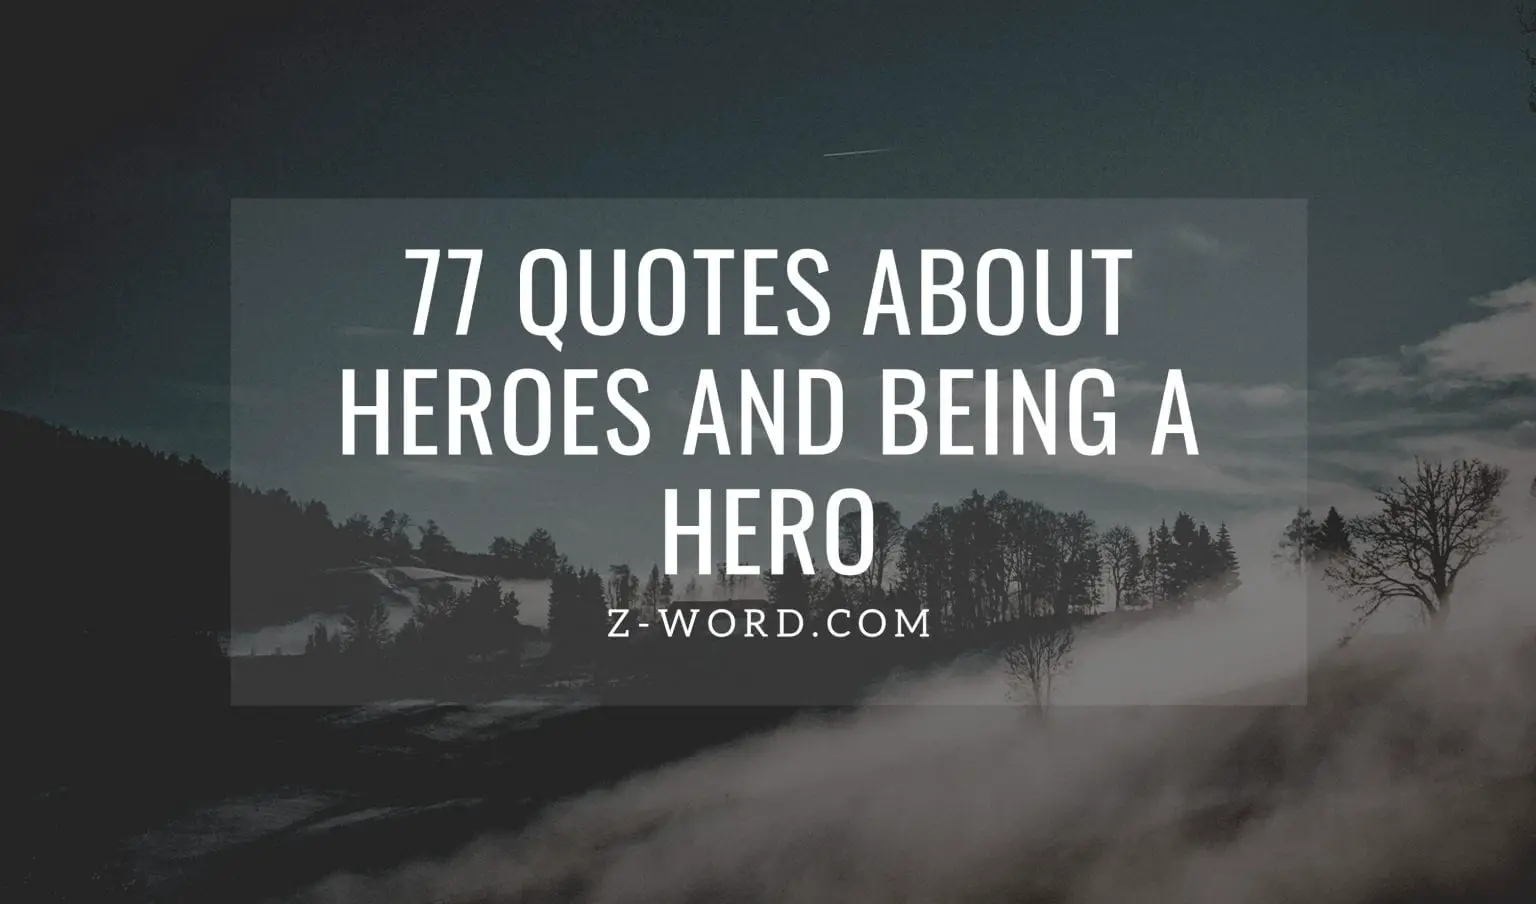 write an inspirational speech that an ordinary hero might deliver